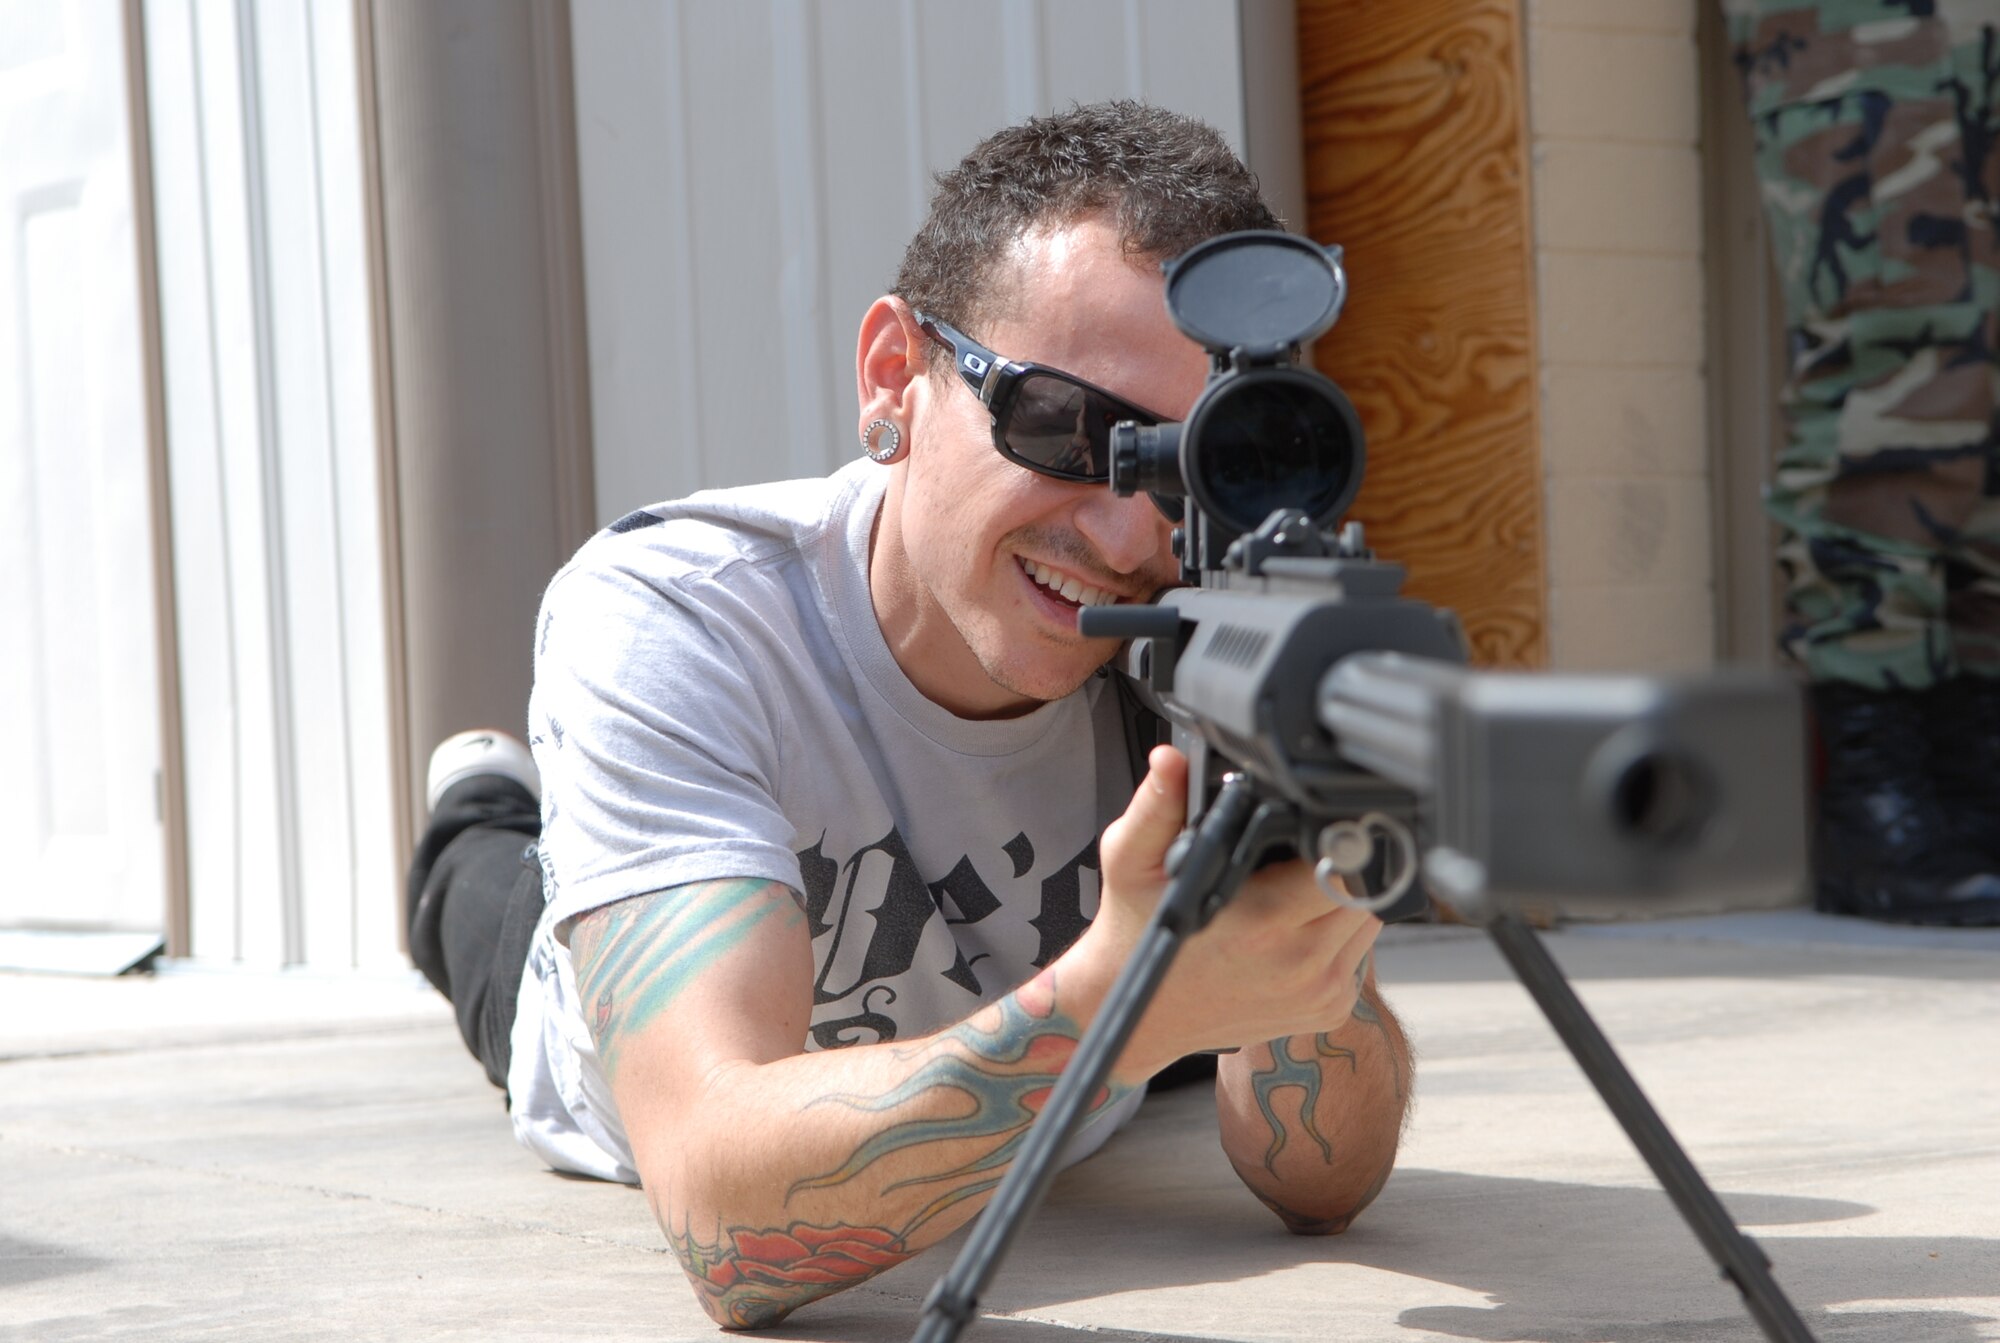 Linkin Park's lead singer, Chester Bennington, focuses his sight on his target during a tour of Luke April 1.